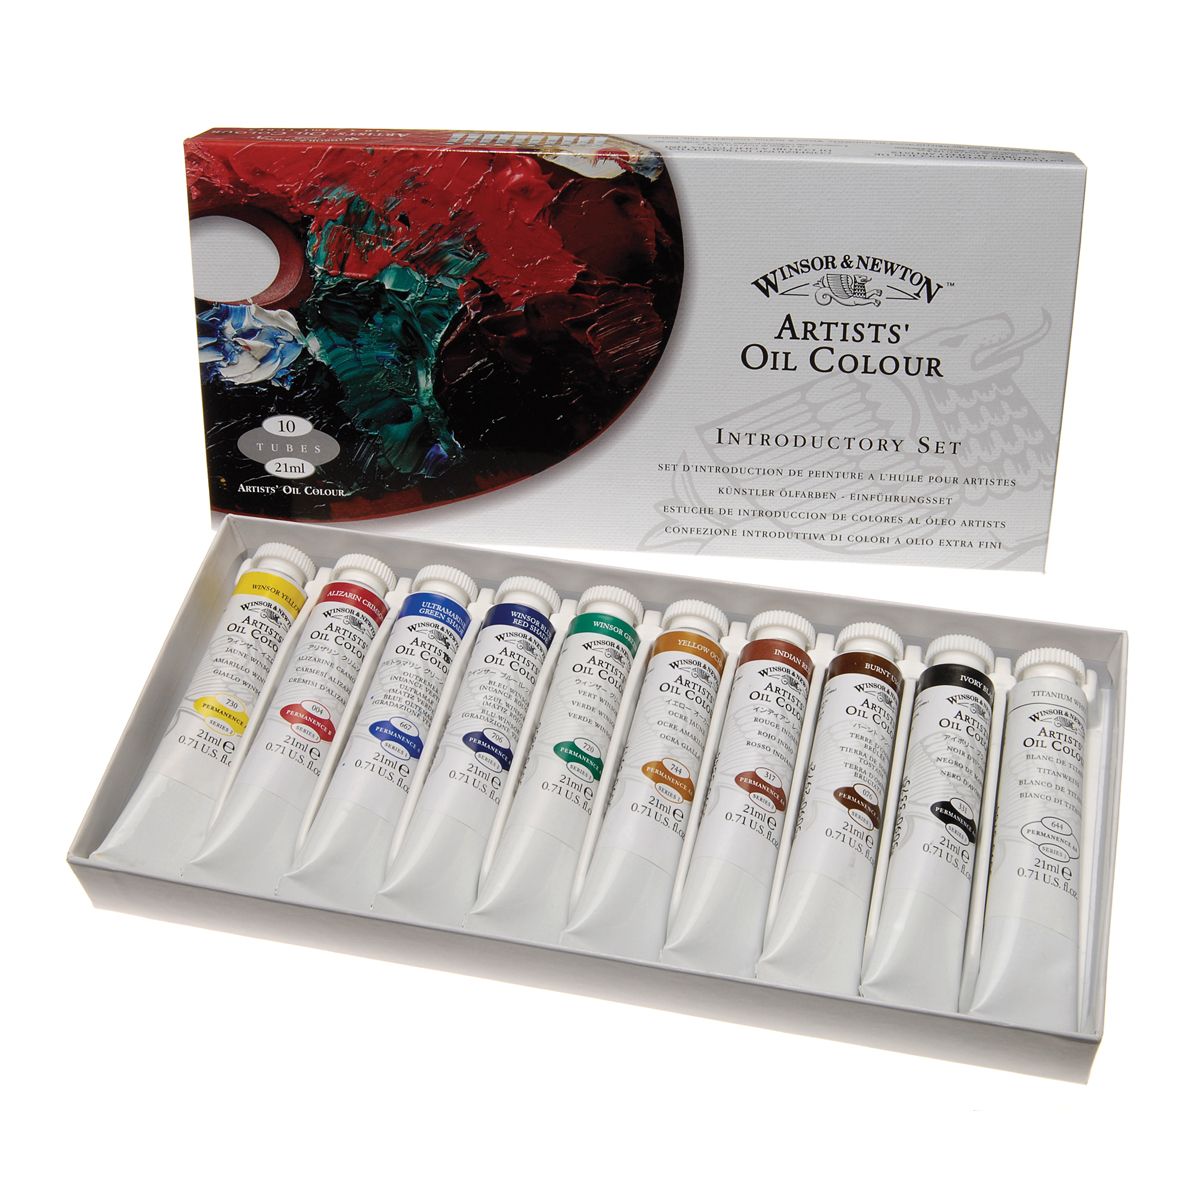 Daler-Rowney Georgian 6-Tube Mixing Artist Oil Paint Set - Painting Set for  Canvas Paper and More - Oil Painting Supplies for Artists and Students 